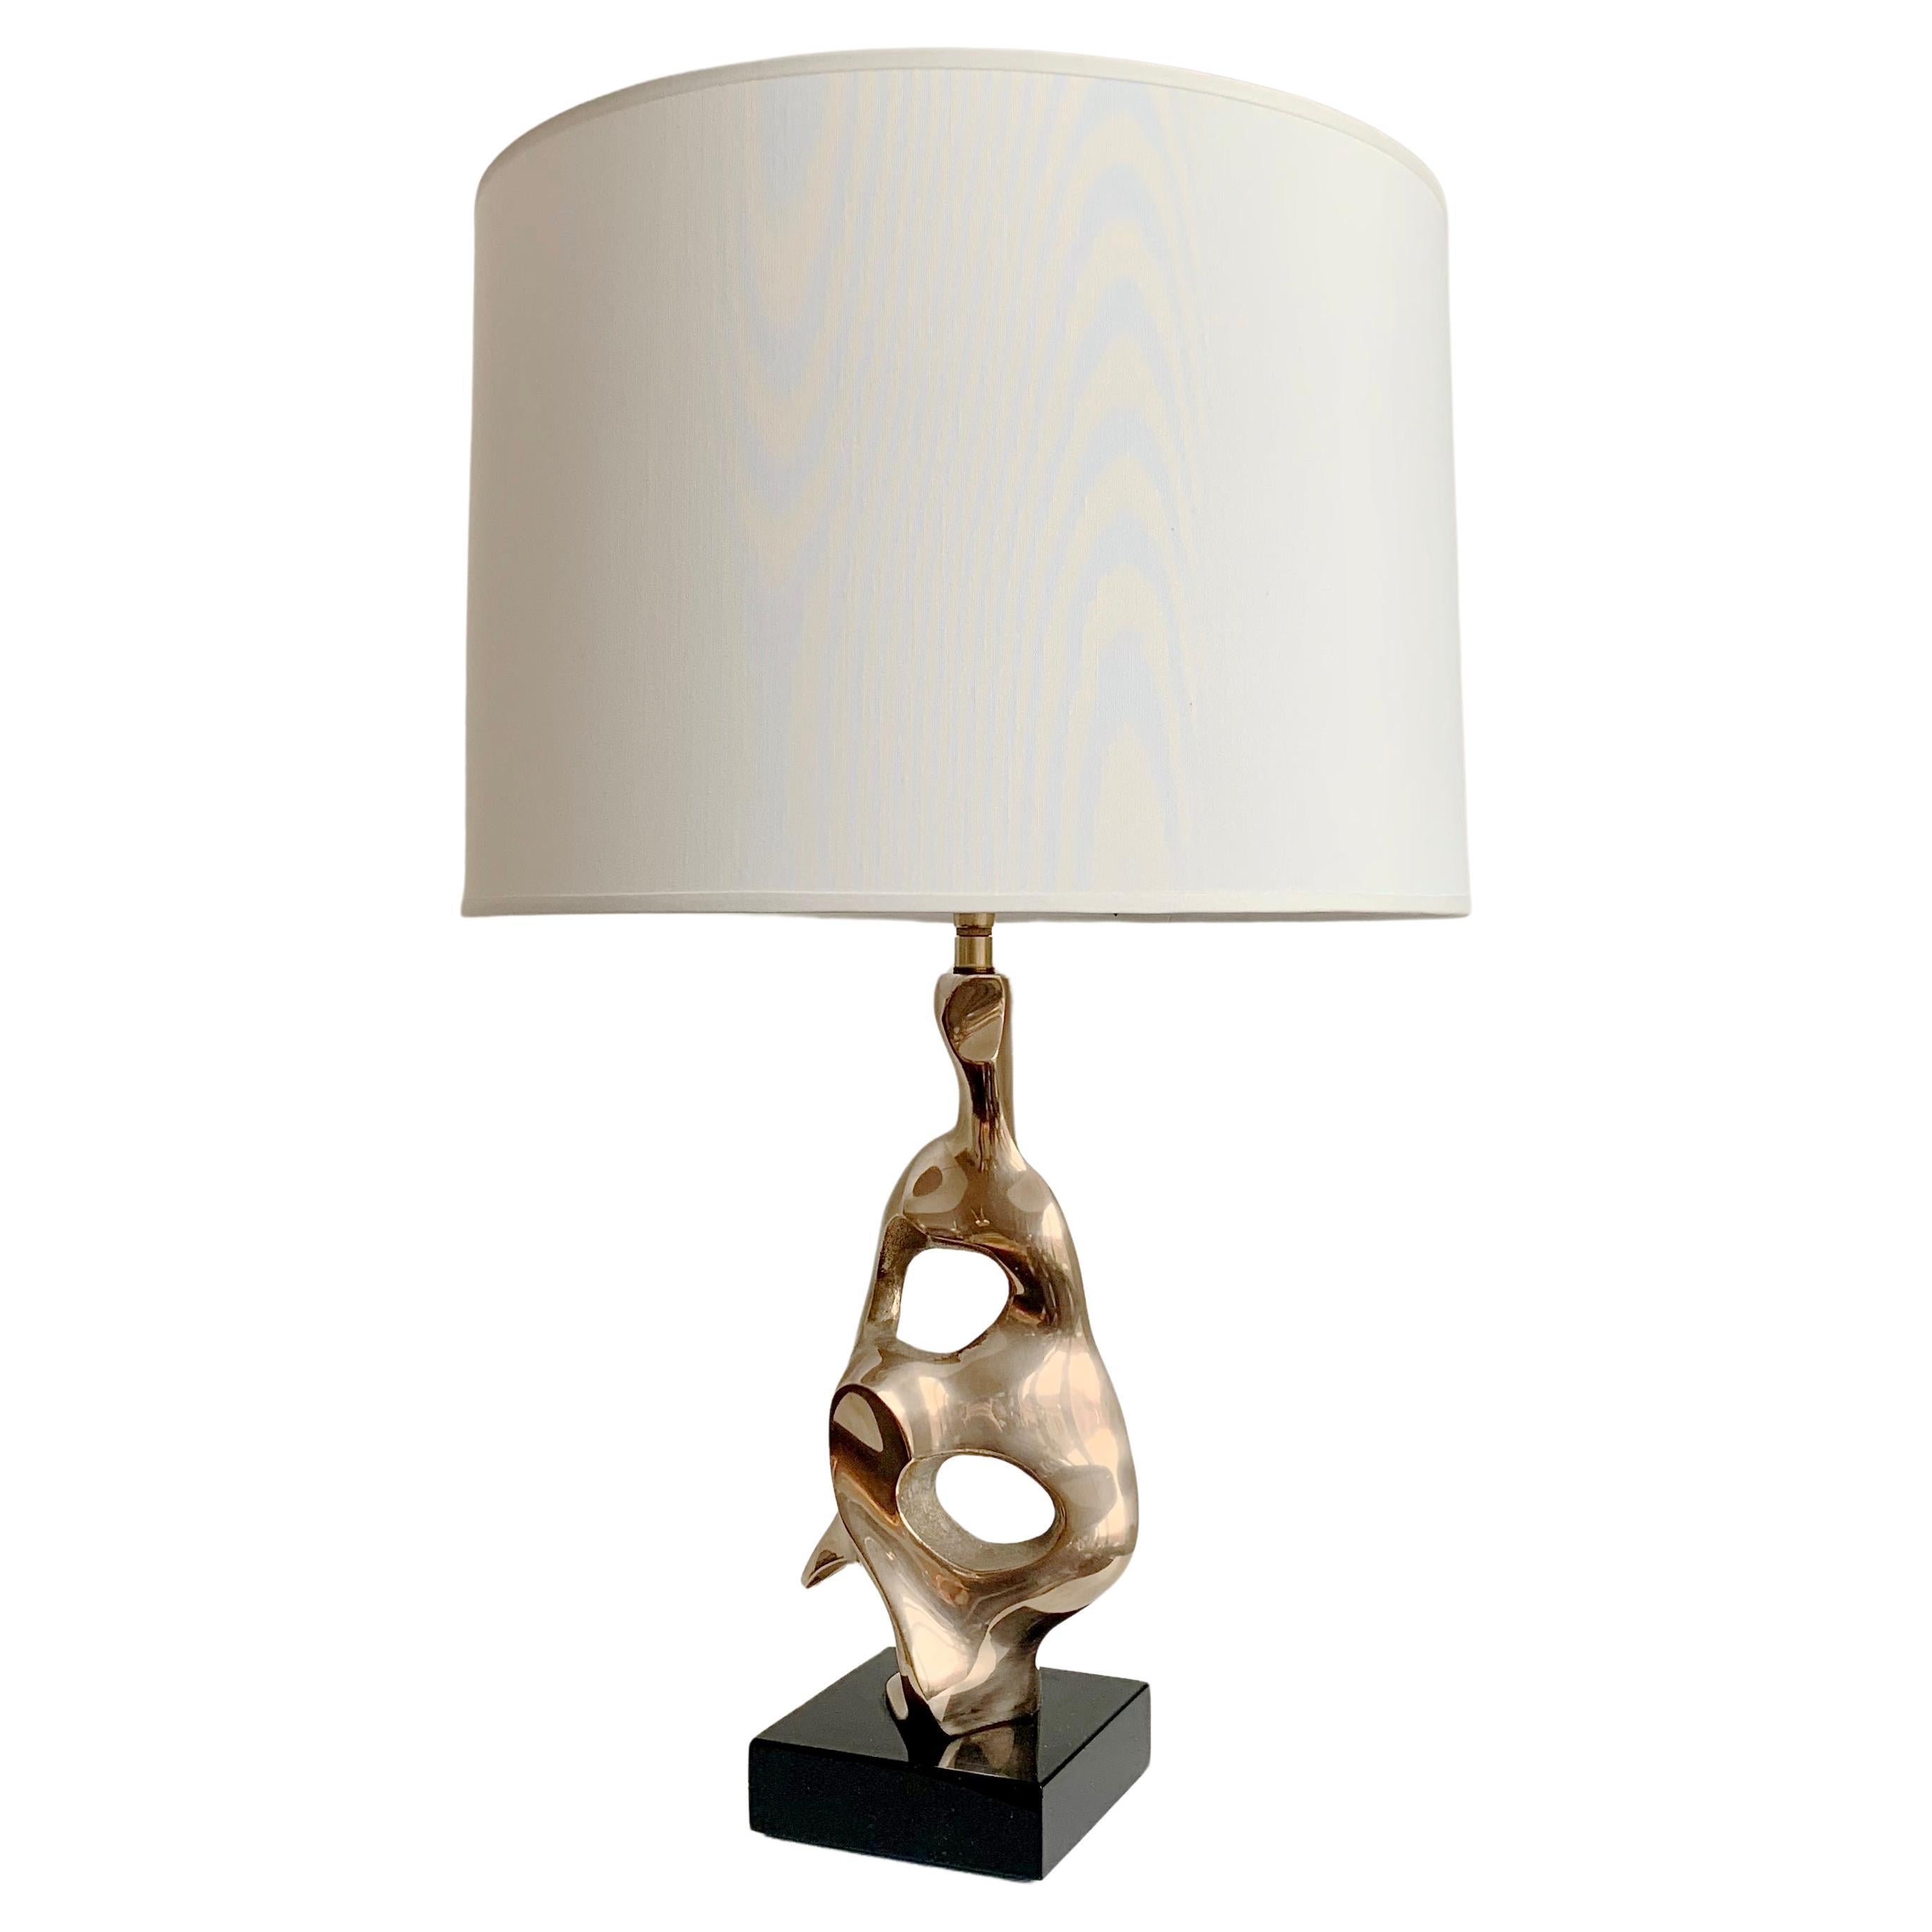 Nice Michel Jaubert signed sculptural table lamp, circa 1975, France.
Polished bronze organic form, black lacquered wood base, new white fabric shade.
Signed M.Jaubert on the bronze.
Rewired.
Dimensions: total height: 51 cm. Diameter of the shade: